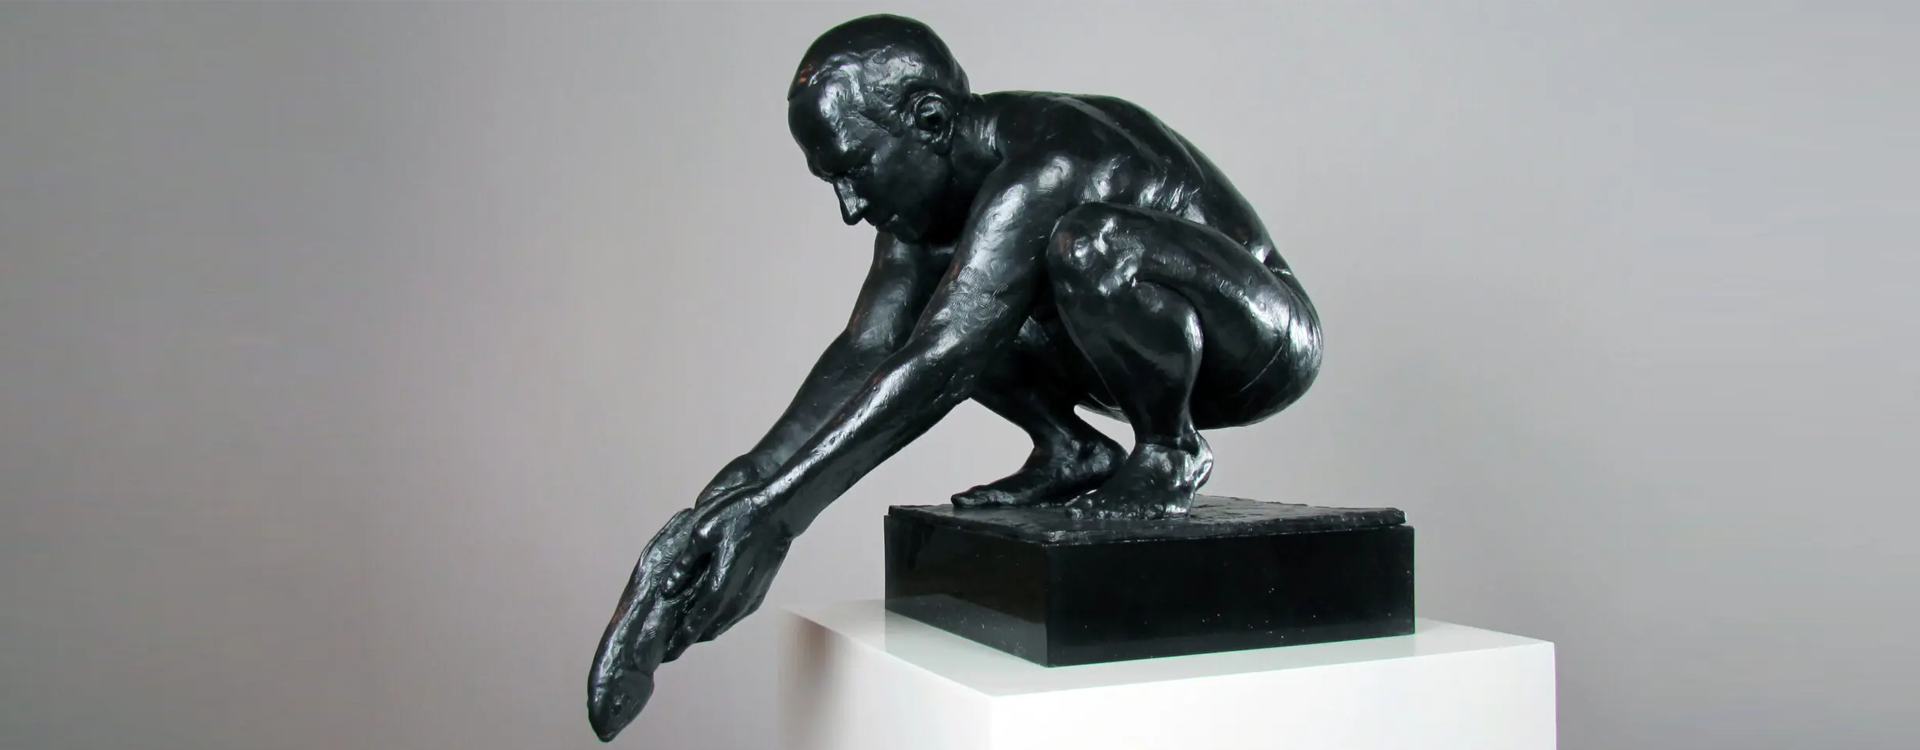 A sculpture of a man sitting on top of a black object.